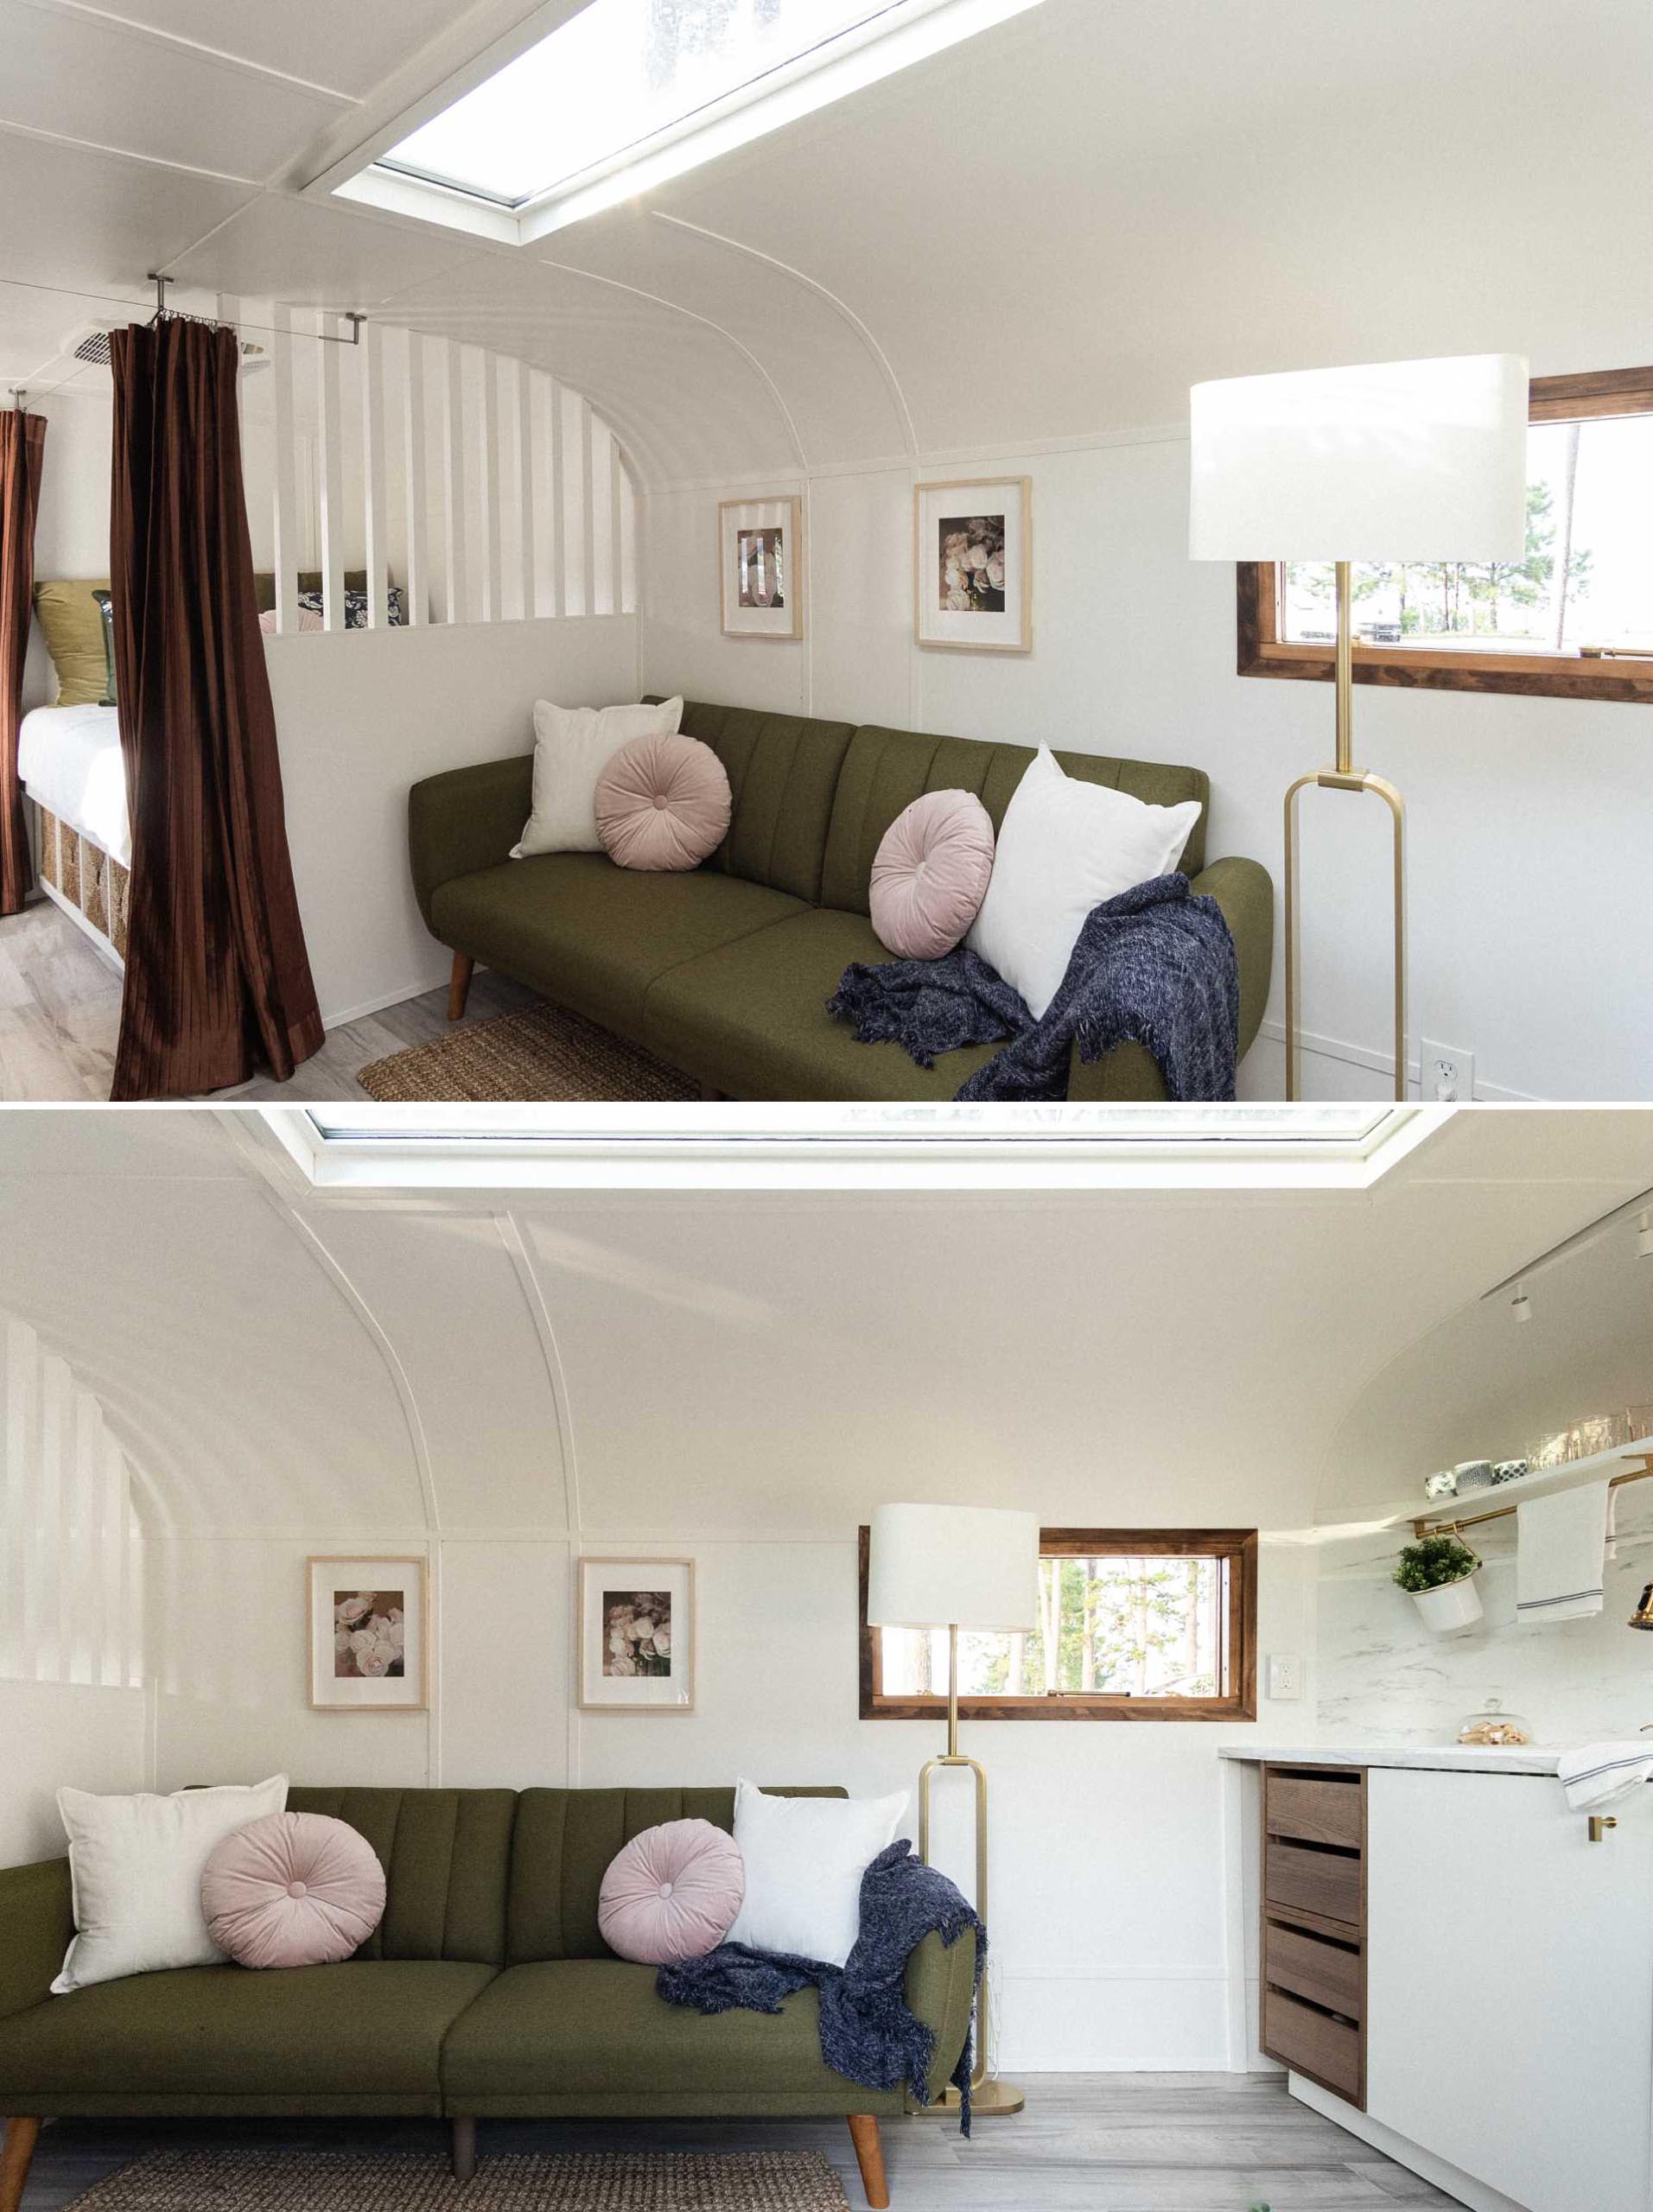 The living room of this remodeled vintage travel trailer is small but functional, with a sofa that transforms into a bed, allowing for two additional people to sleep in the trailer.